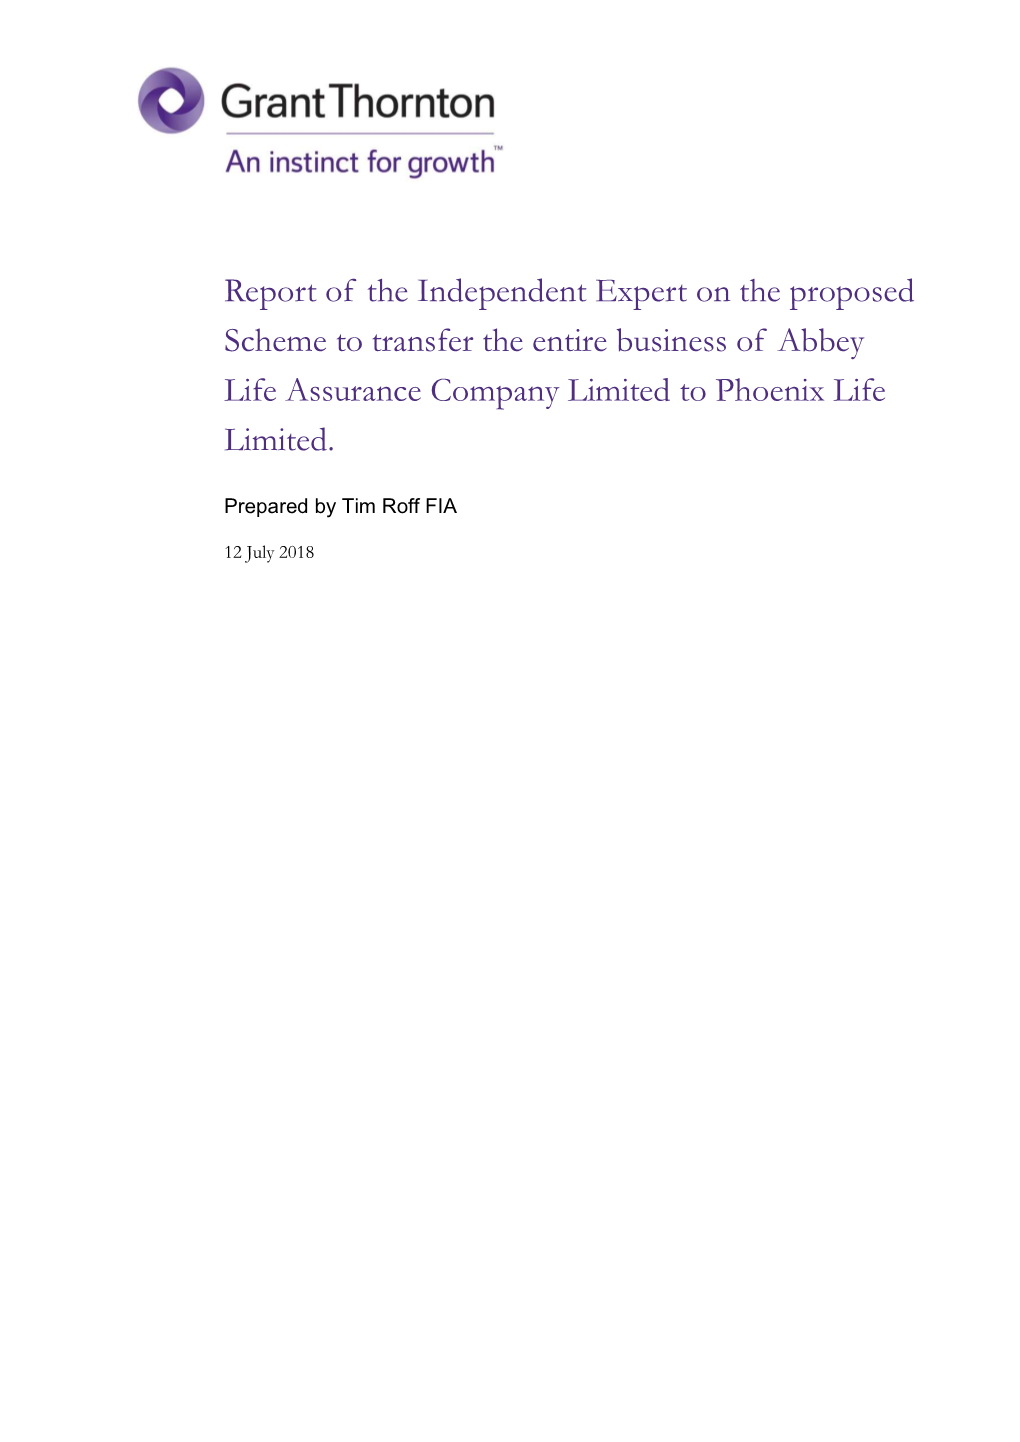 Report of the Independent Expert on the Proposed Scheme to Transfer the Entire Business of Abbey Life Assurance Company Limited to Phoenix Life Limited